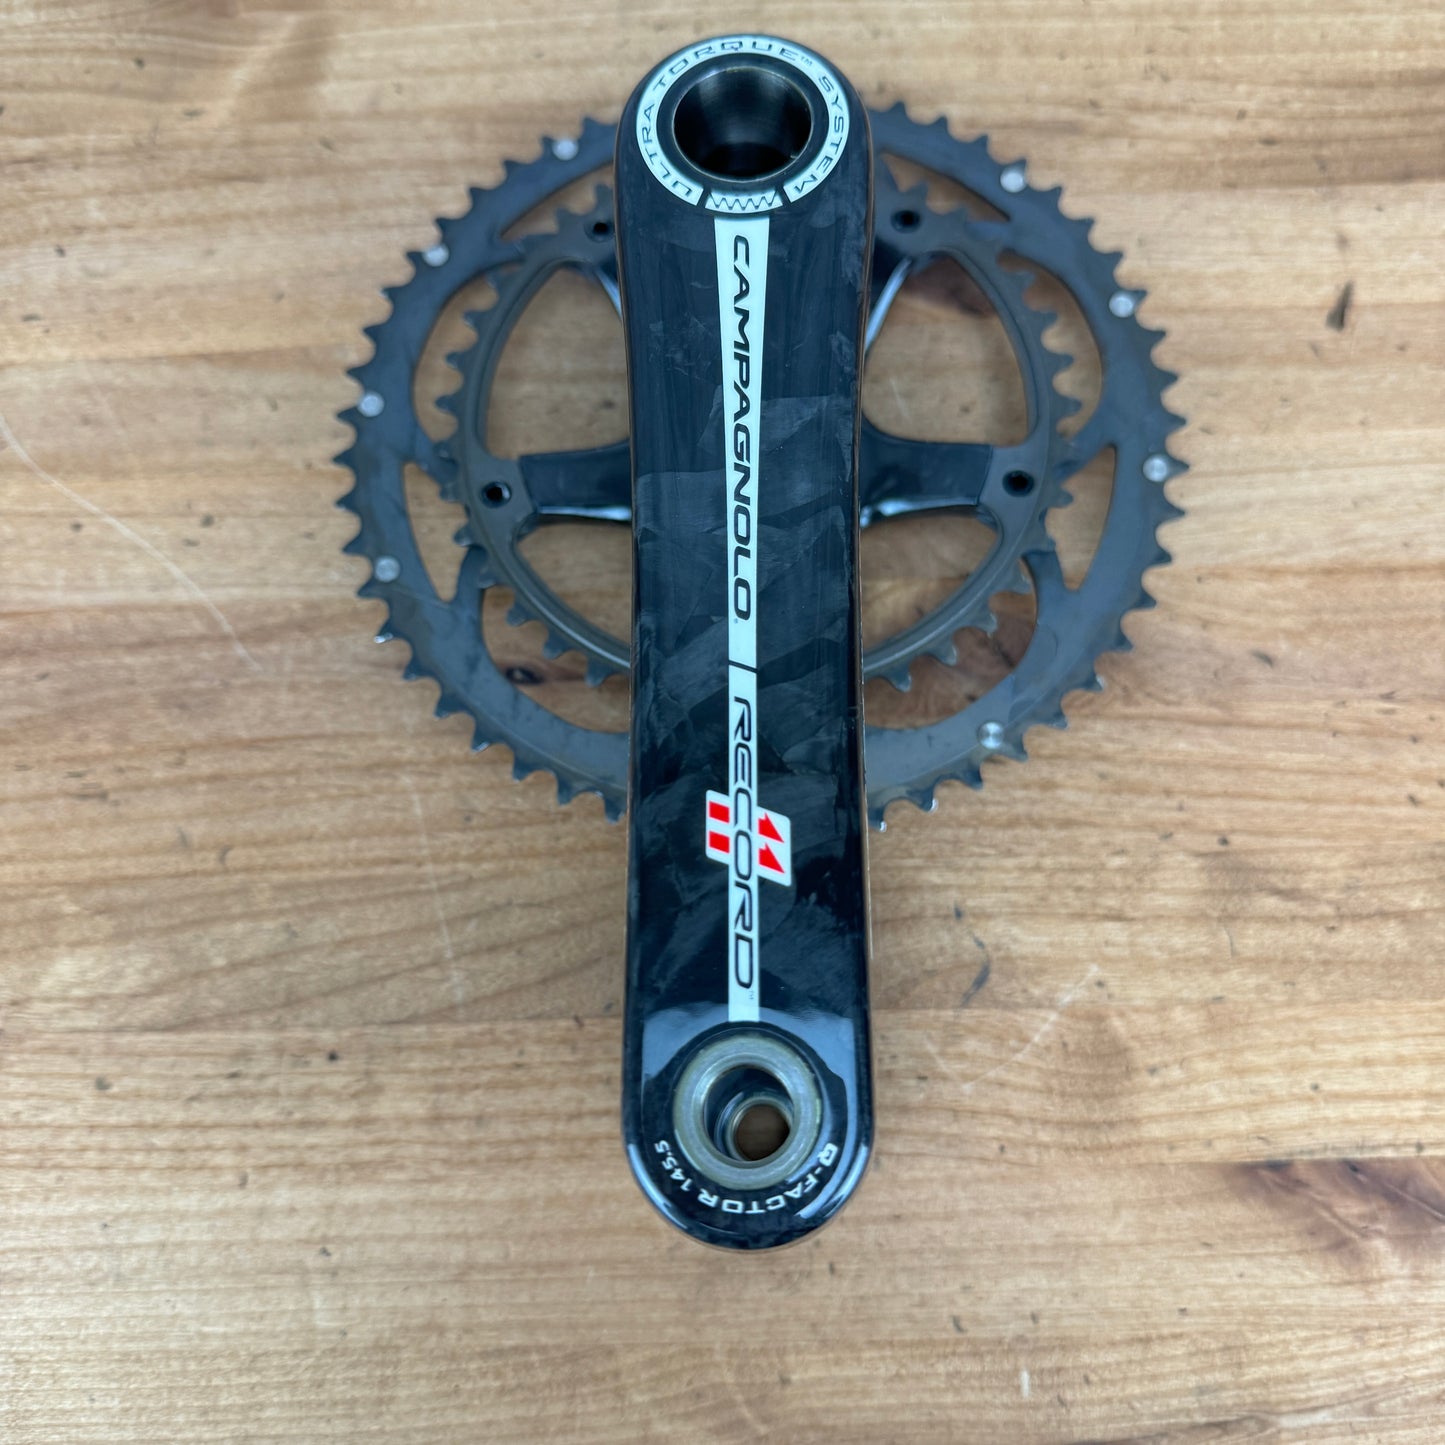 Mint! Campagnolo Record 11 2015-2017 53/39t 11-Speed Carbon Crankset 632g